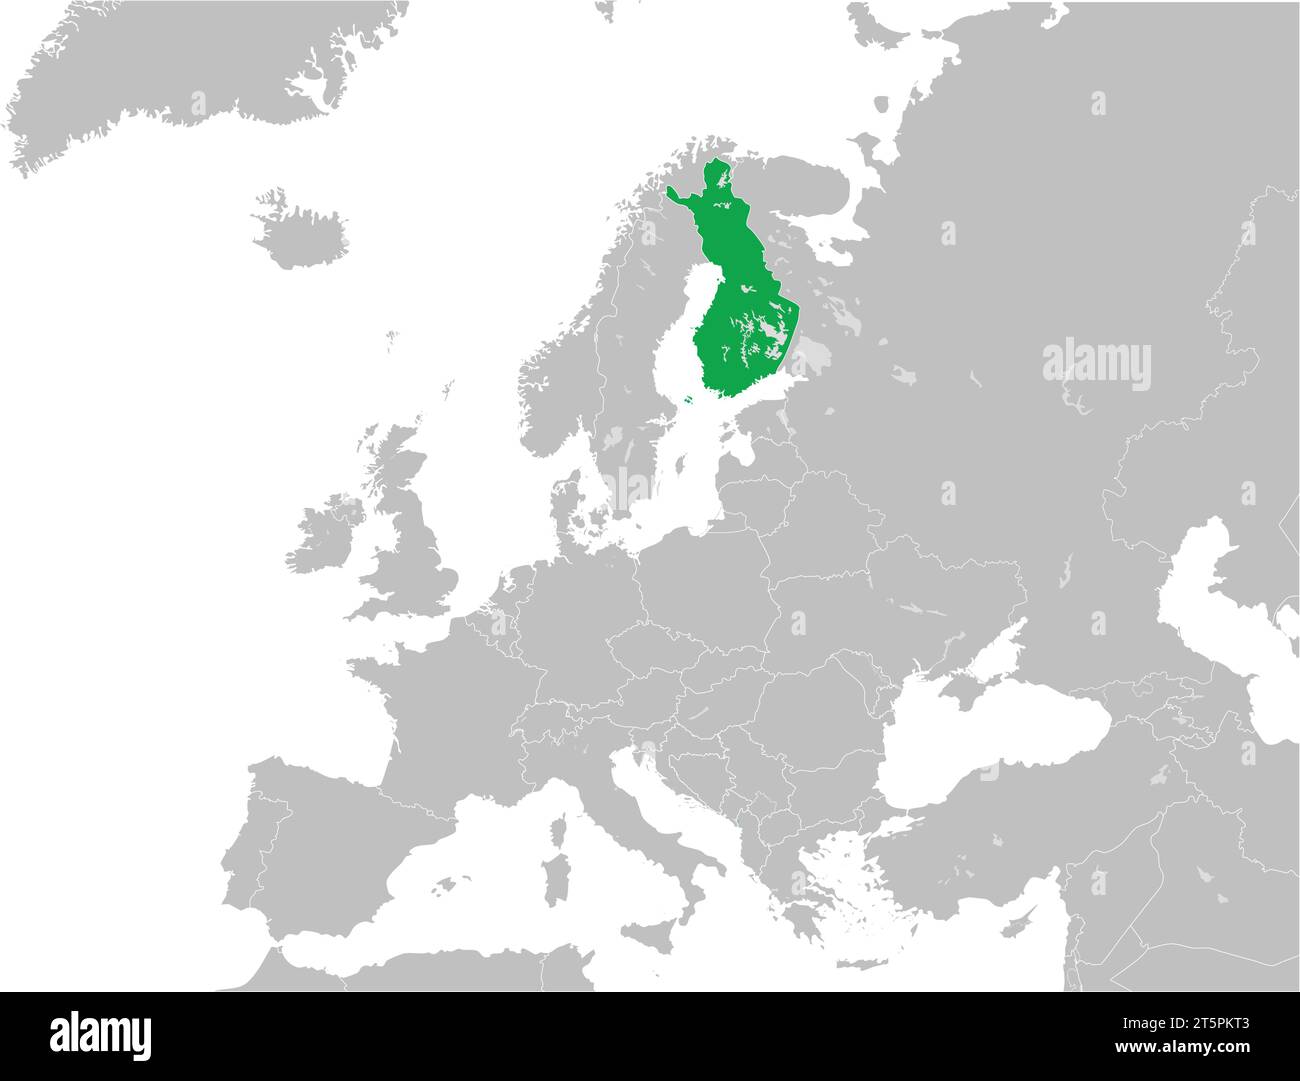 Location map of the REPUBLIC OF FINLAND, EUROPE Stock Vector